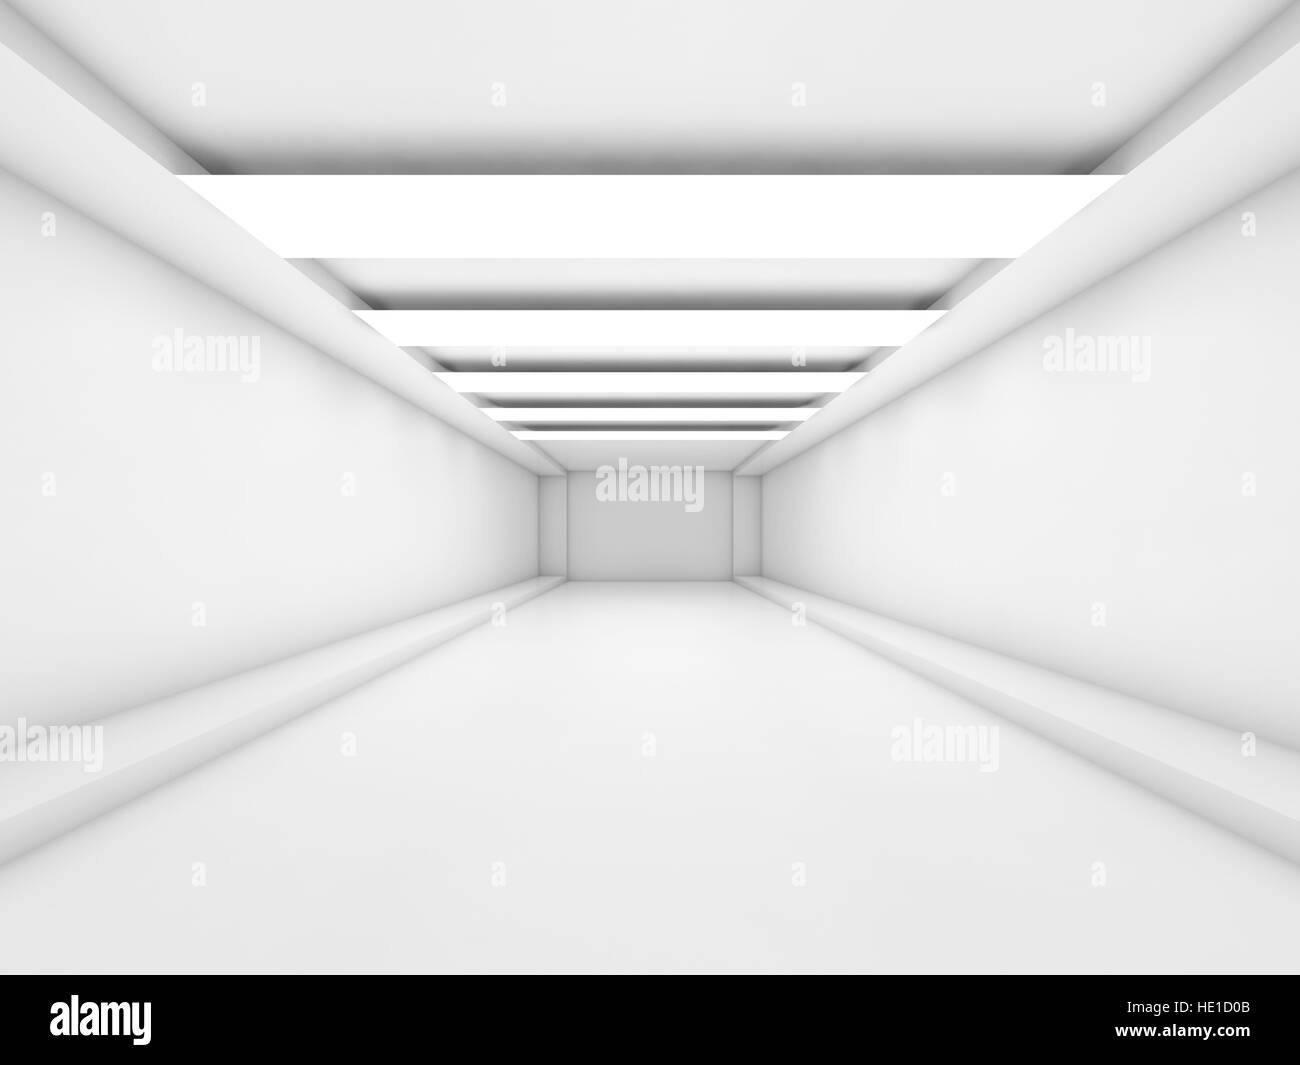 Abstract Empty White Tunnel Background With Stripes Of Decorative